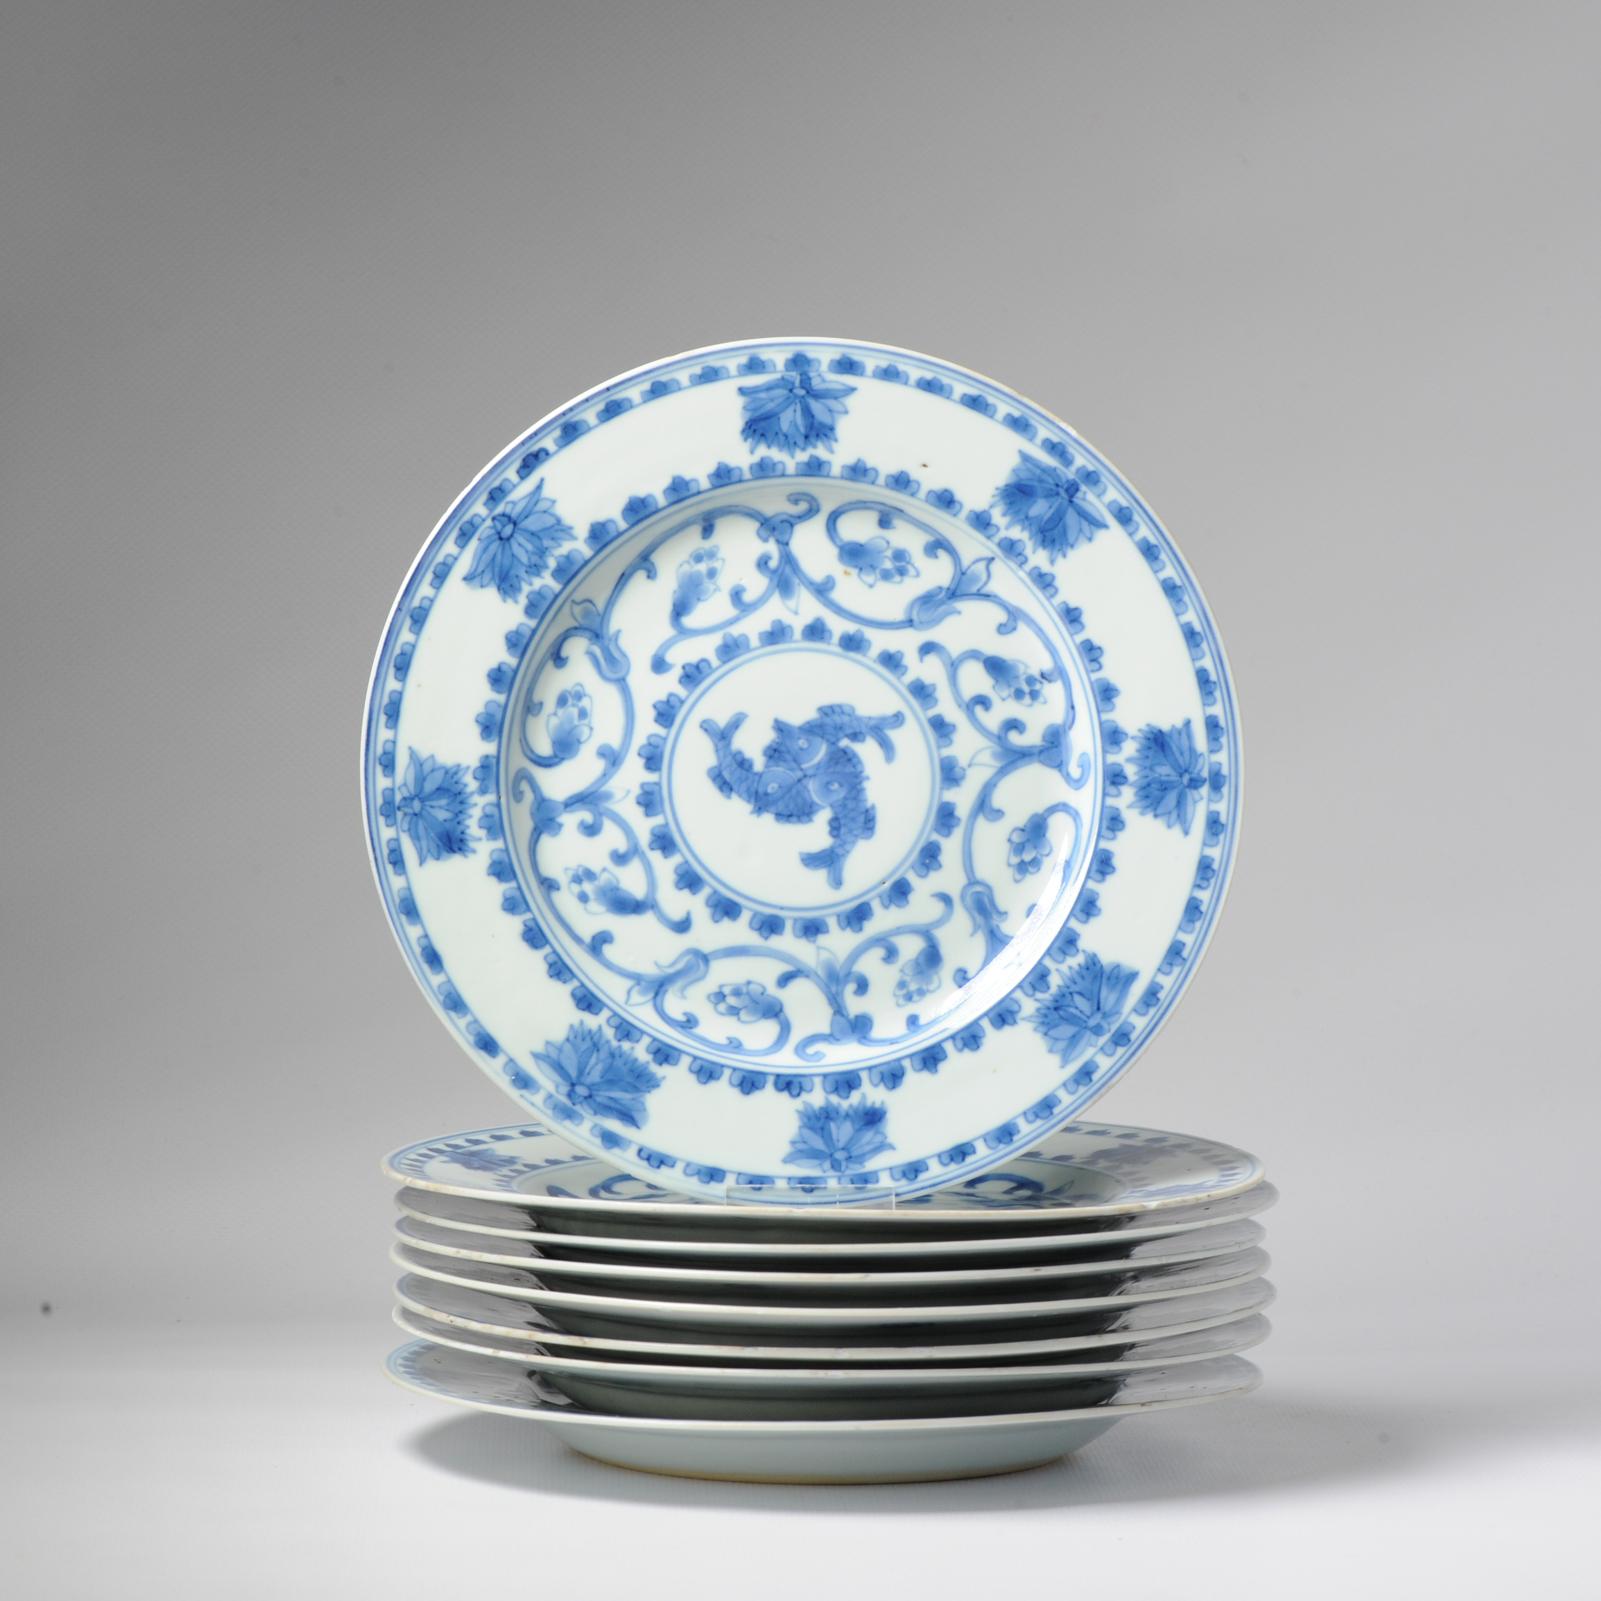 Qing #8 Antique Chinese Porcelain 18th C Kangxi/Yongzheng Period Blue White Dinner For Sale